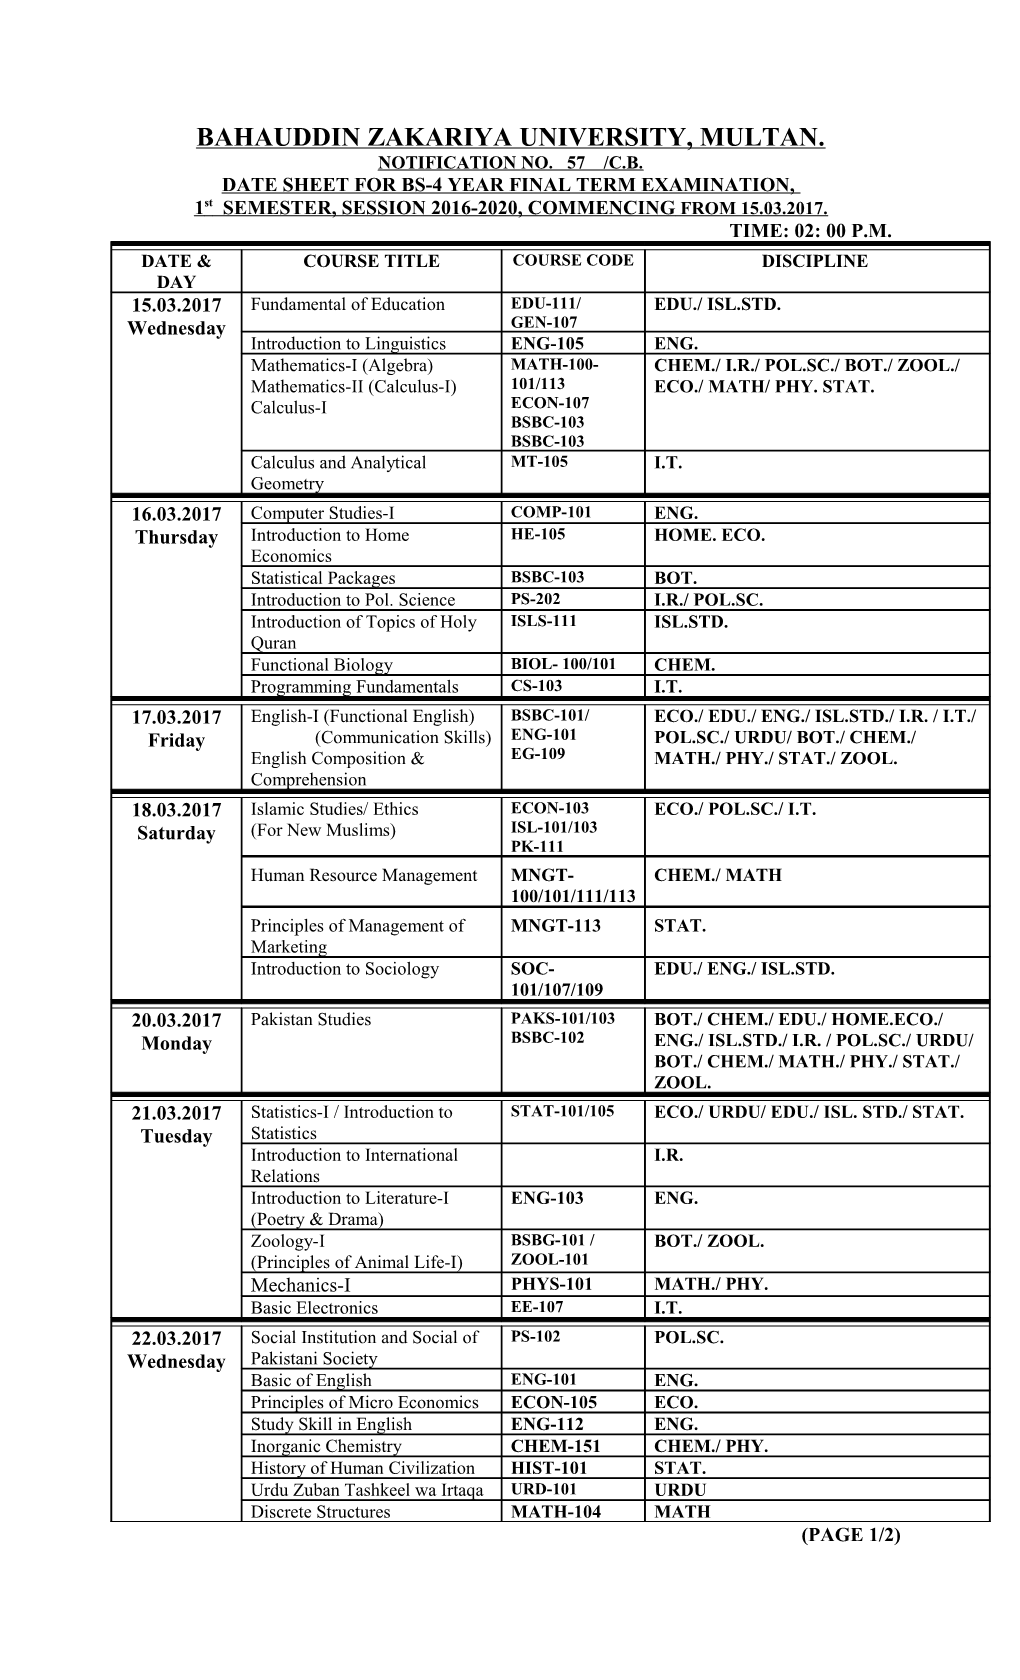 Date Sheet for Bs-4 Year Final Term Examination